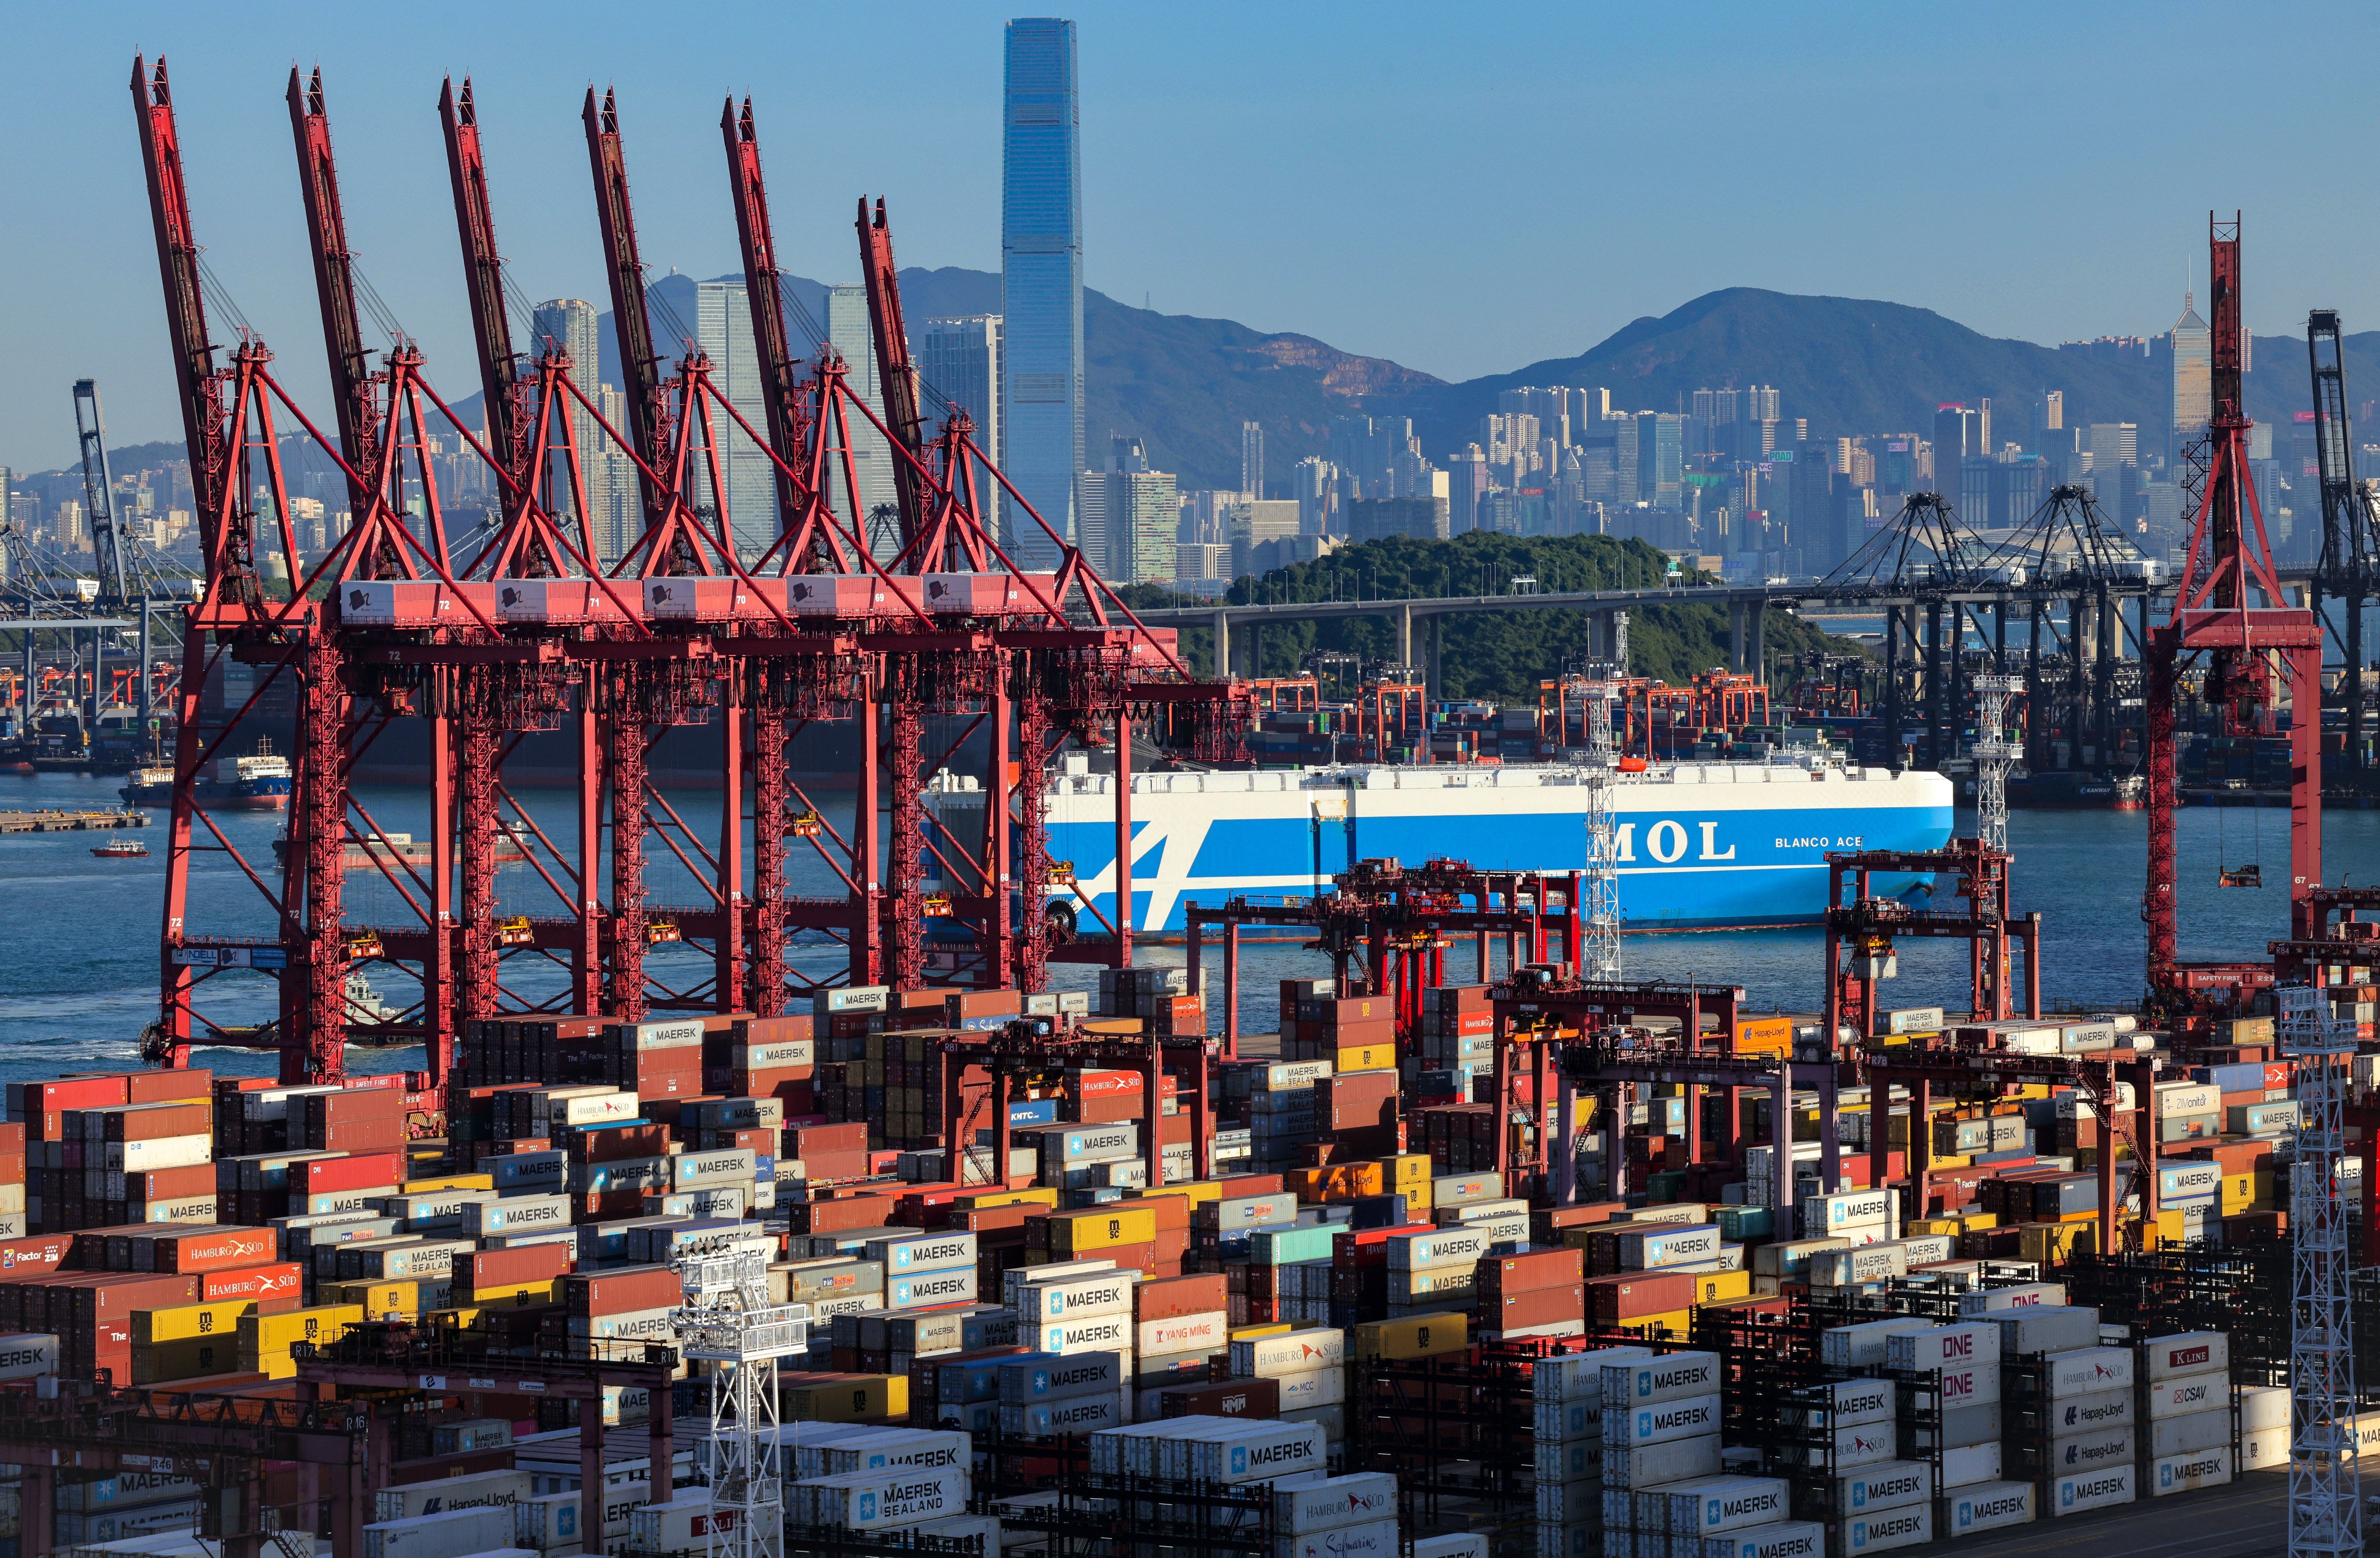 Despite declining container port throughput, Hong Kong has opportunities to transition from its historical roots in the maritime industry into more value-added services like ship management and brokering. Photo: Jelly Tse